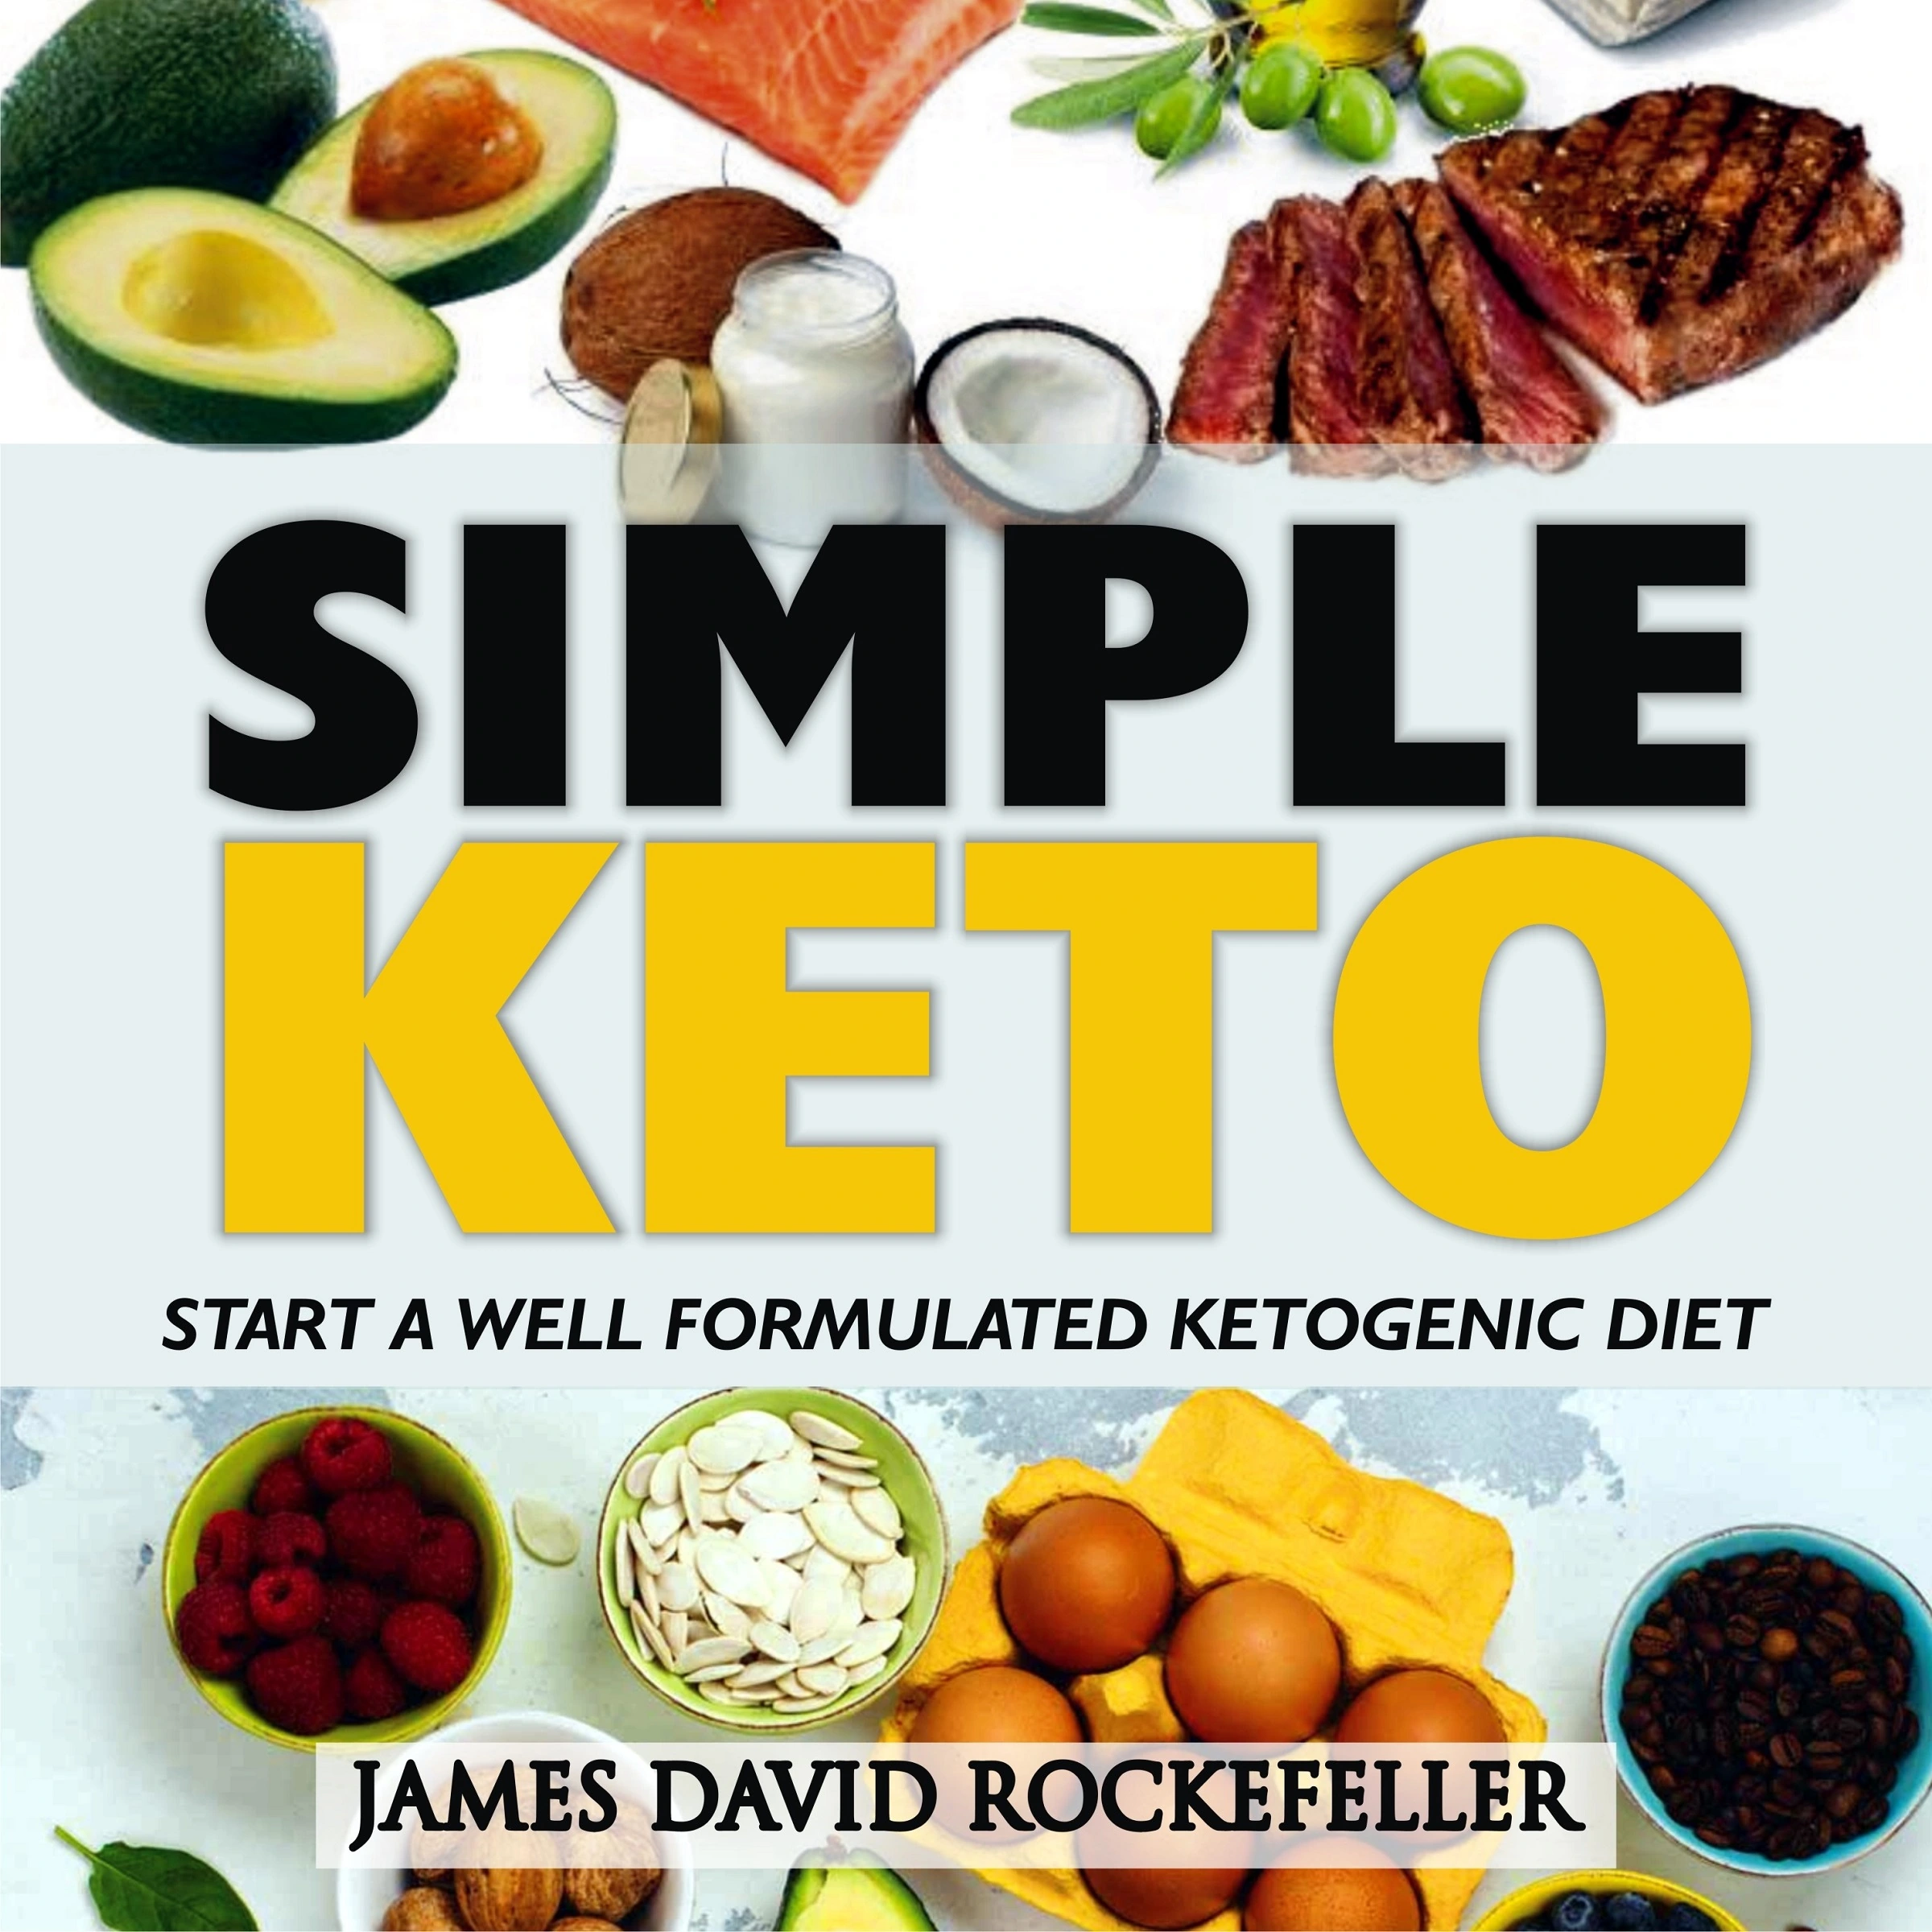 Simple Keto: Start a Well Formulated Ketogenic Diet Audiobook by James David Rockefeller